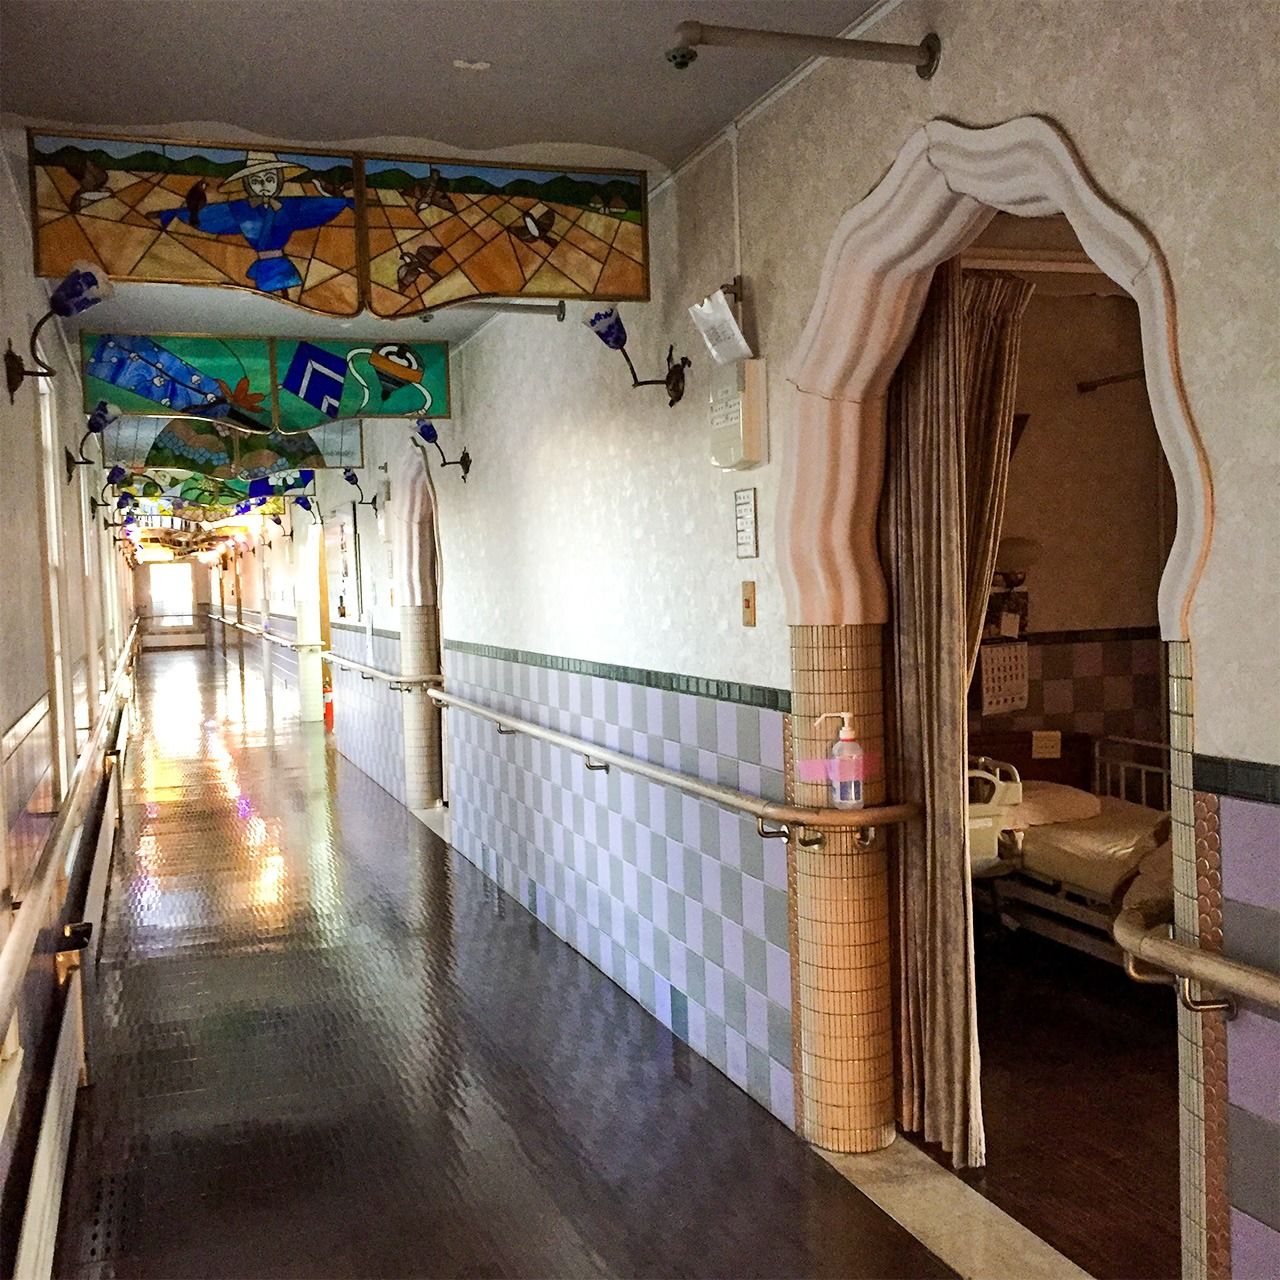 The corridor ceilings of the building are decorated with stained glass depicting scenes from the four seasons.